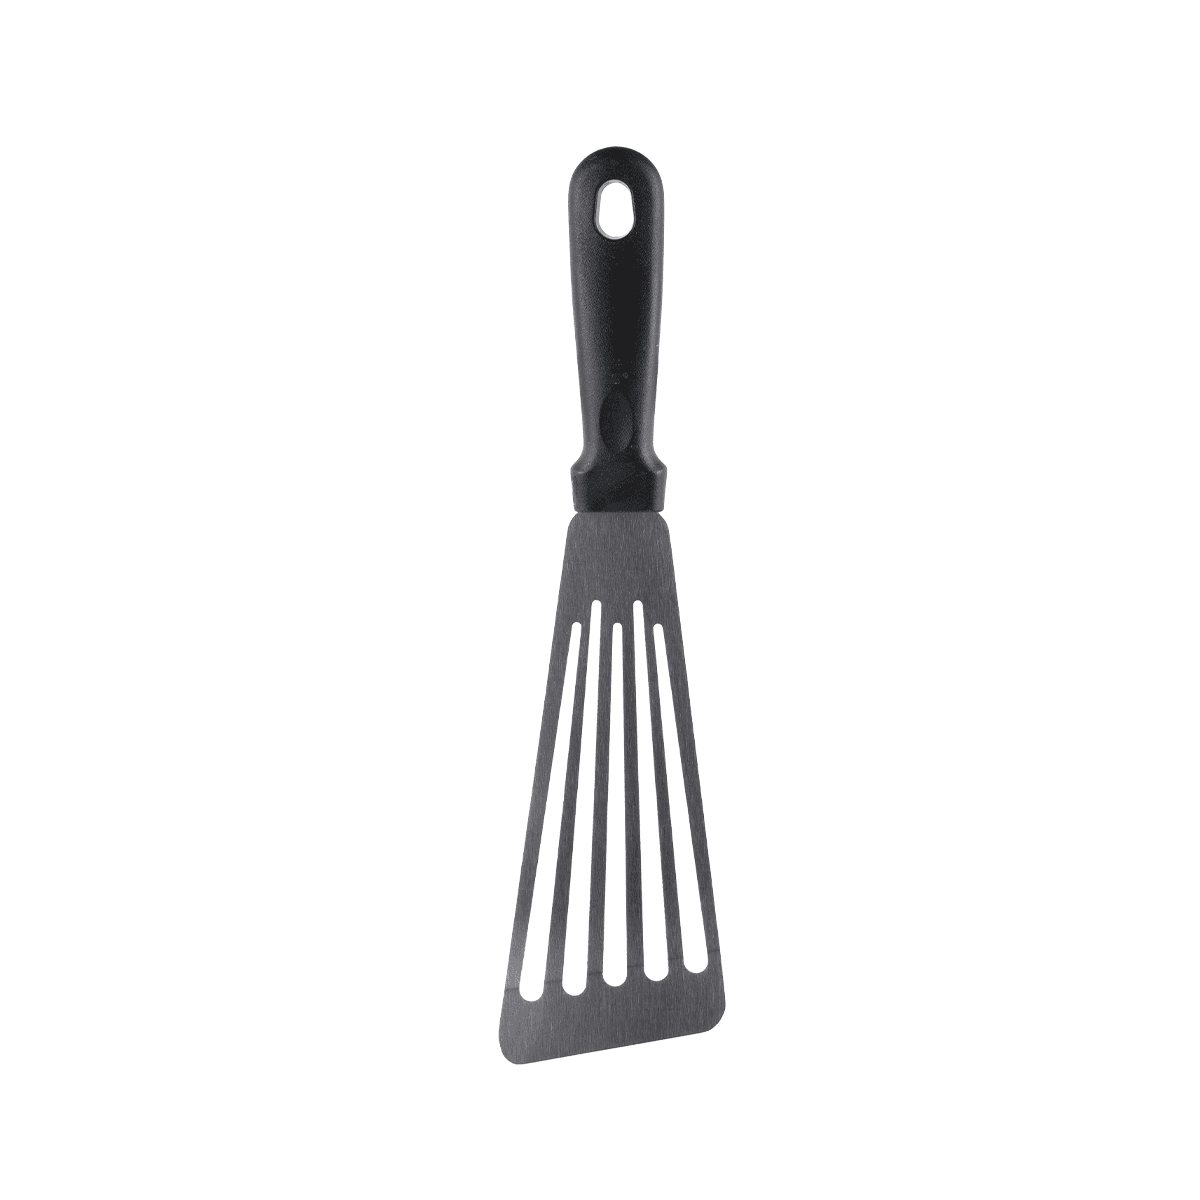 Vague Stainless Steel Fish Shovel with Handle Black Silver Stainless Steel